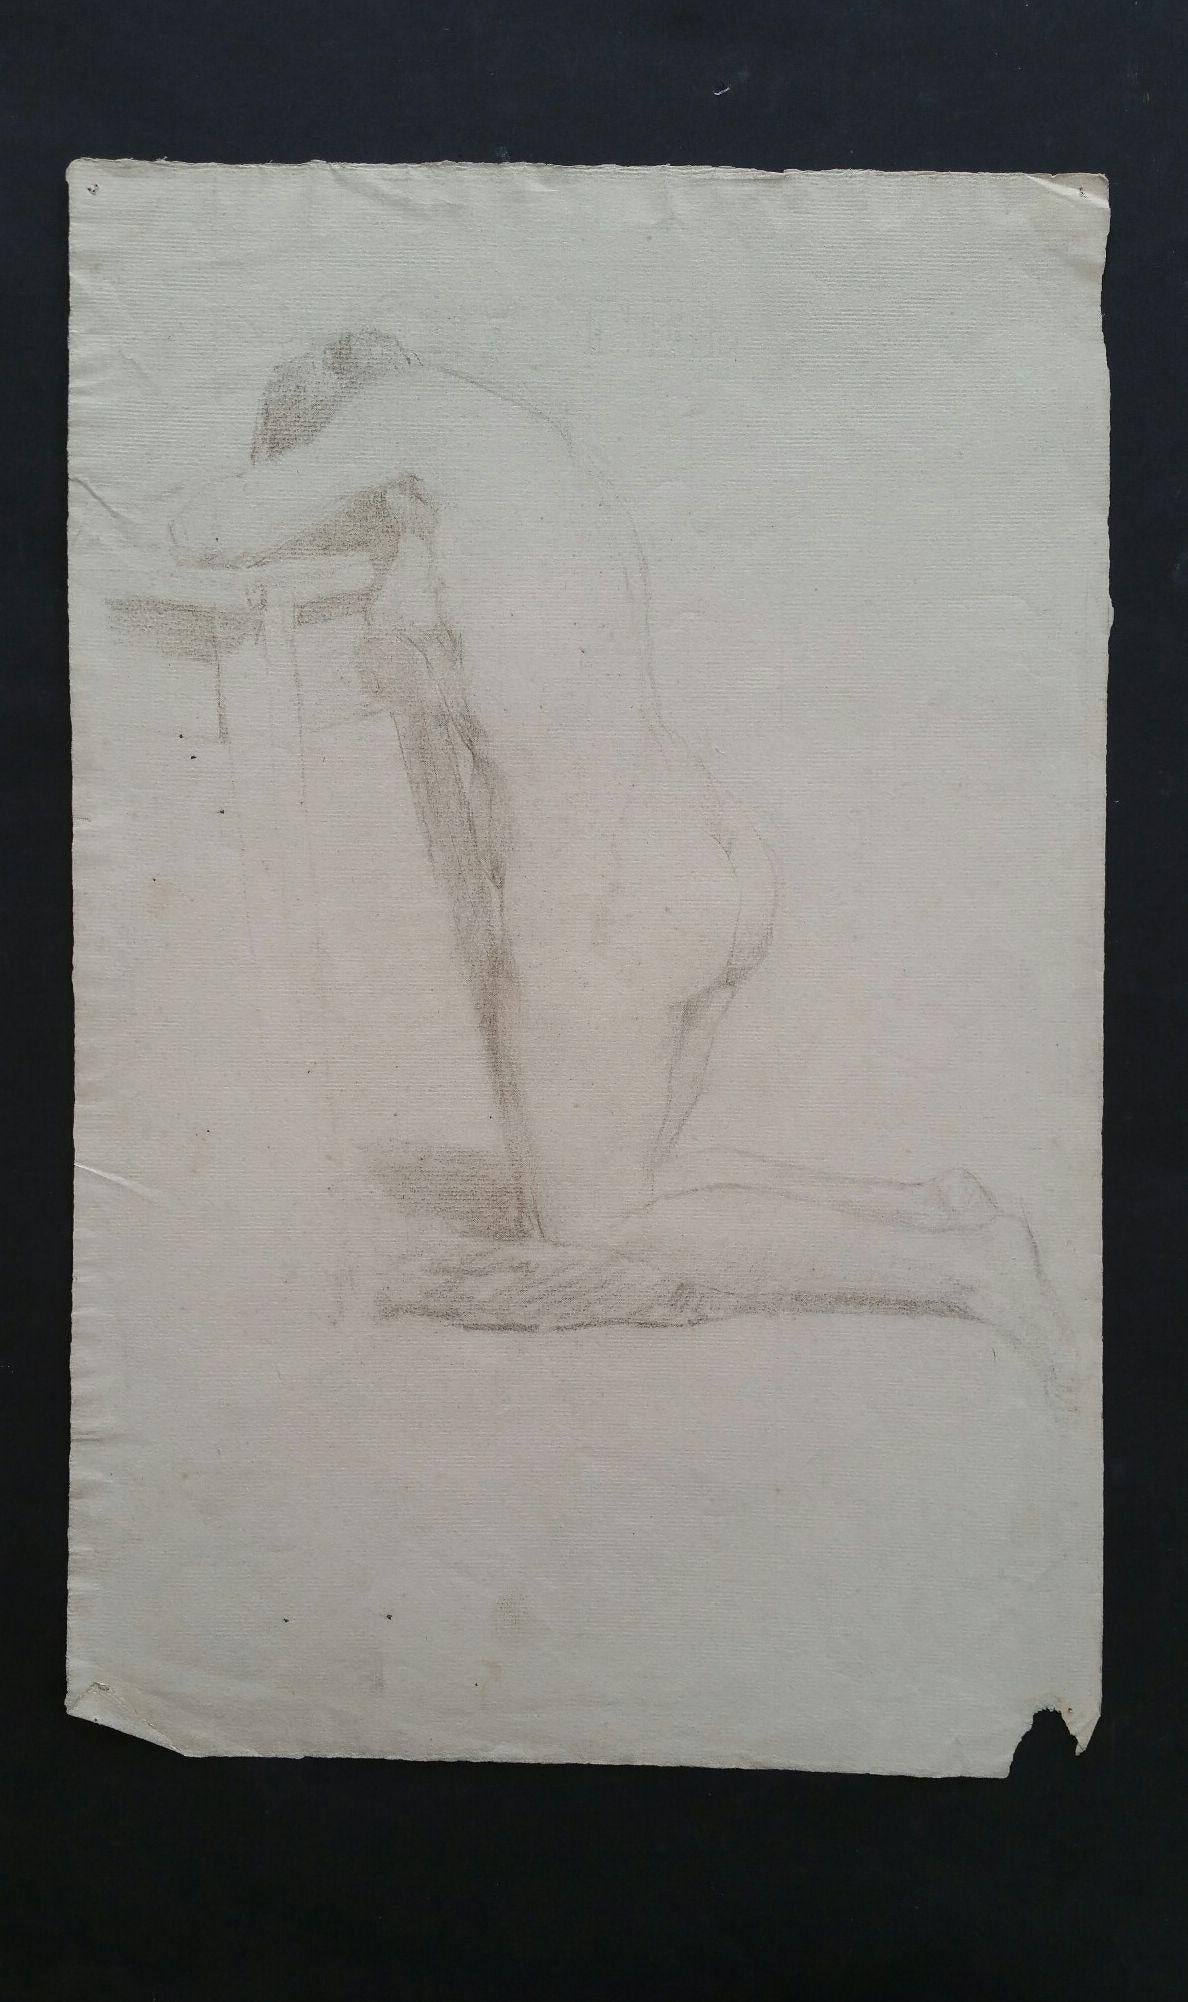 English Graphite Sketch of a Female Nude, Kneeling
by Henry George Moon (British 1857-1905)
on off white artists paper, unframed
measurements: sheet 18.75 x 12 inches 

provenance: from the artists estate

Condition report: pin holes to